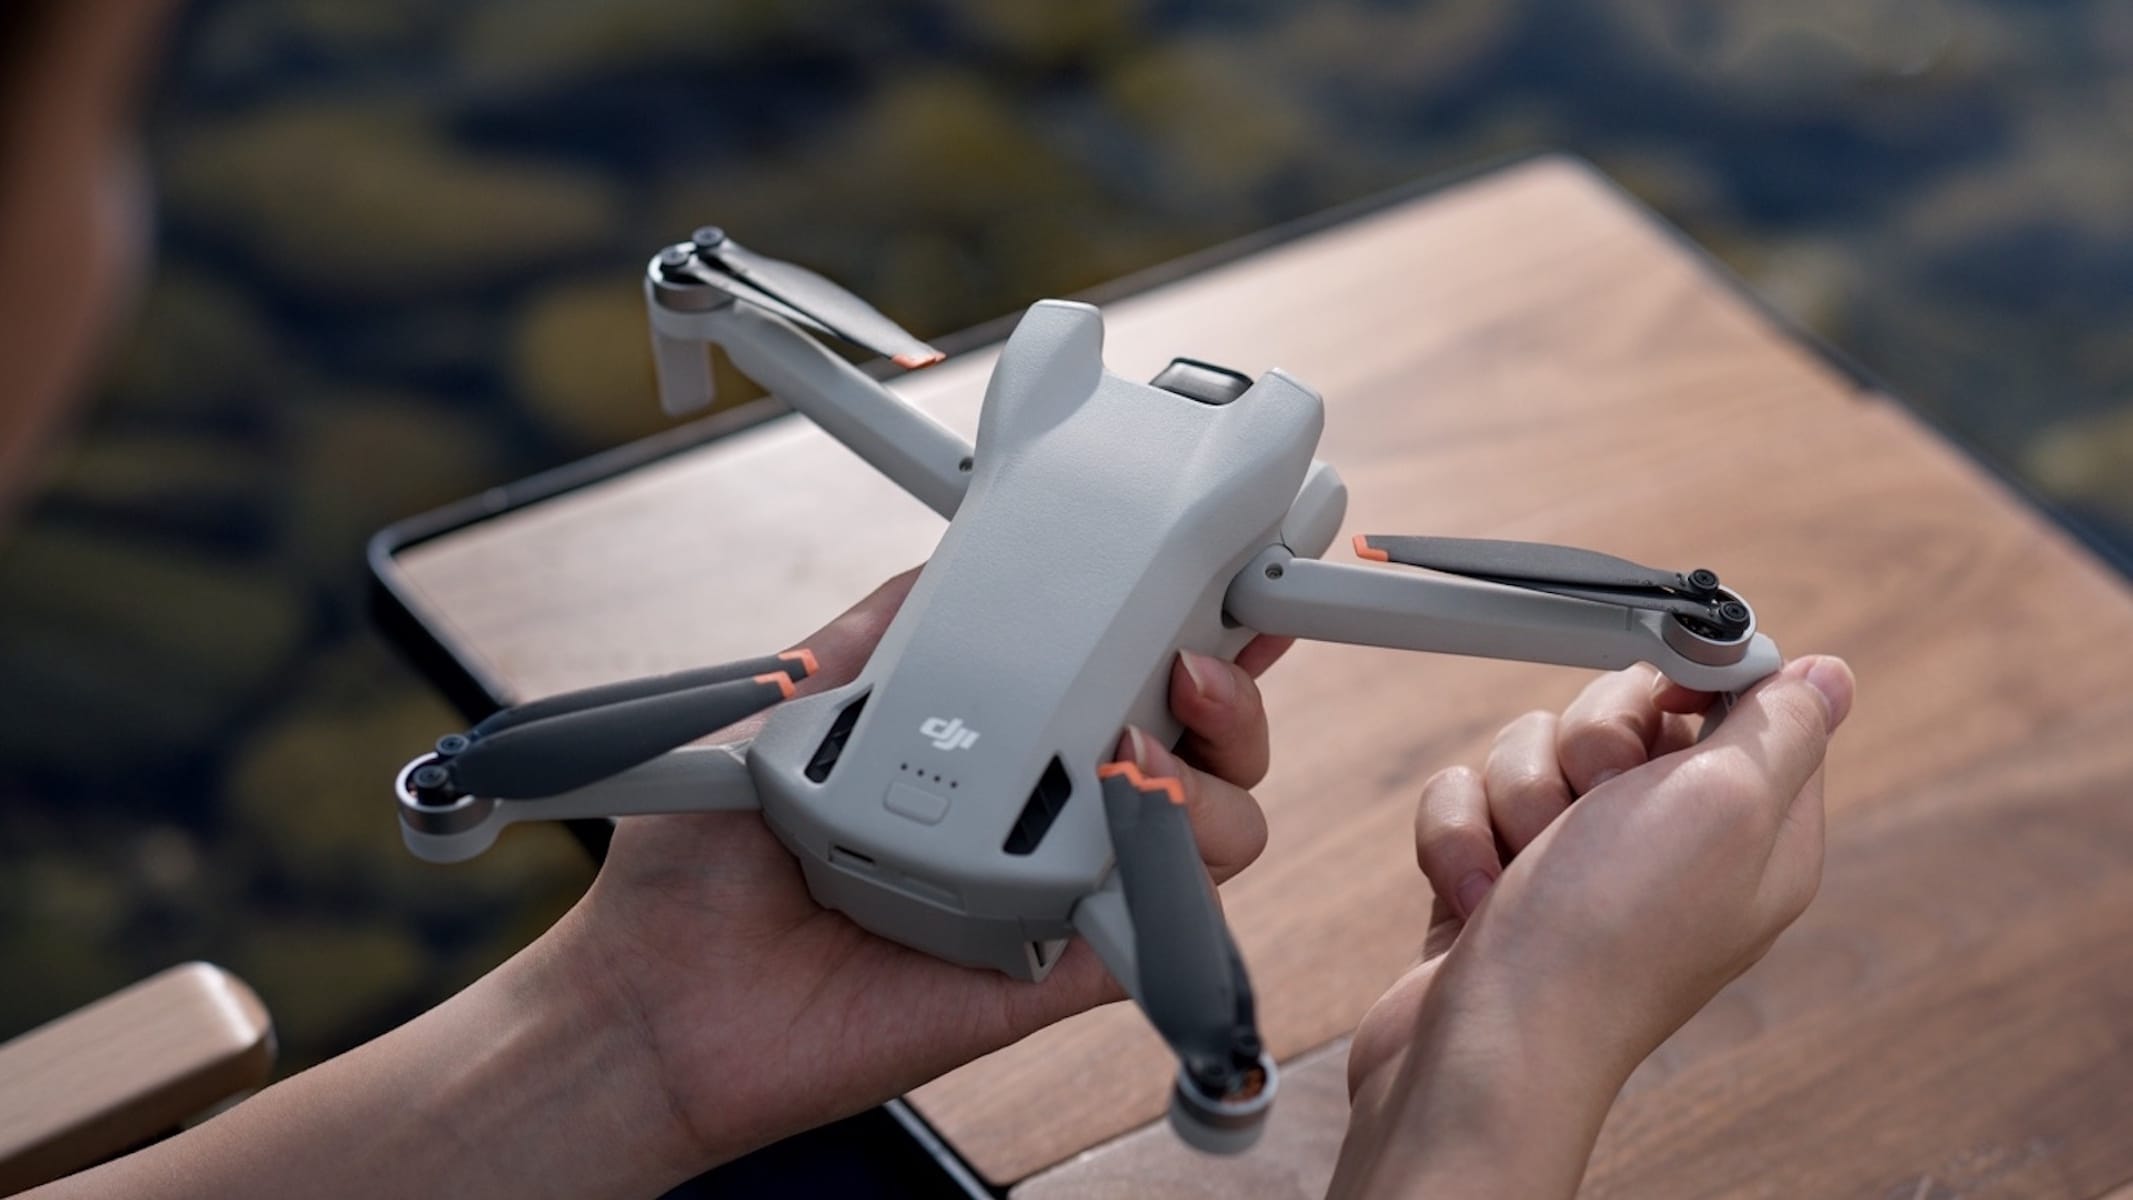 Take your aerial photography to new heights with these cool drones